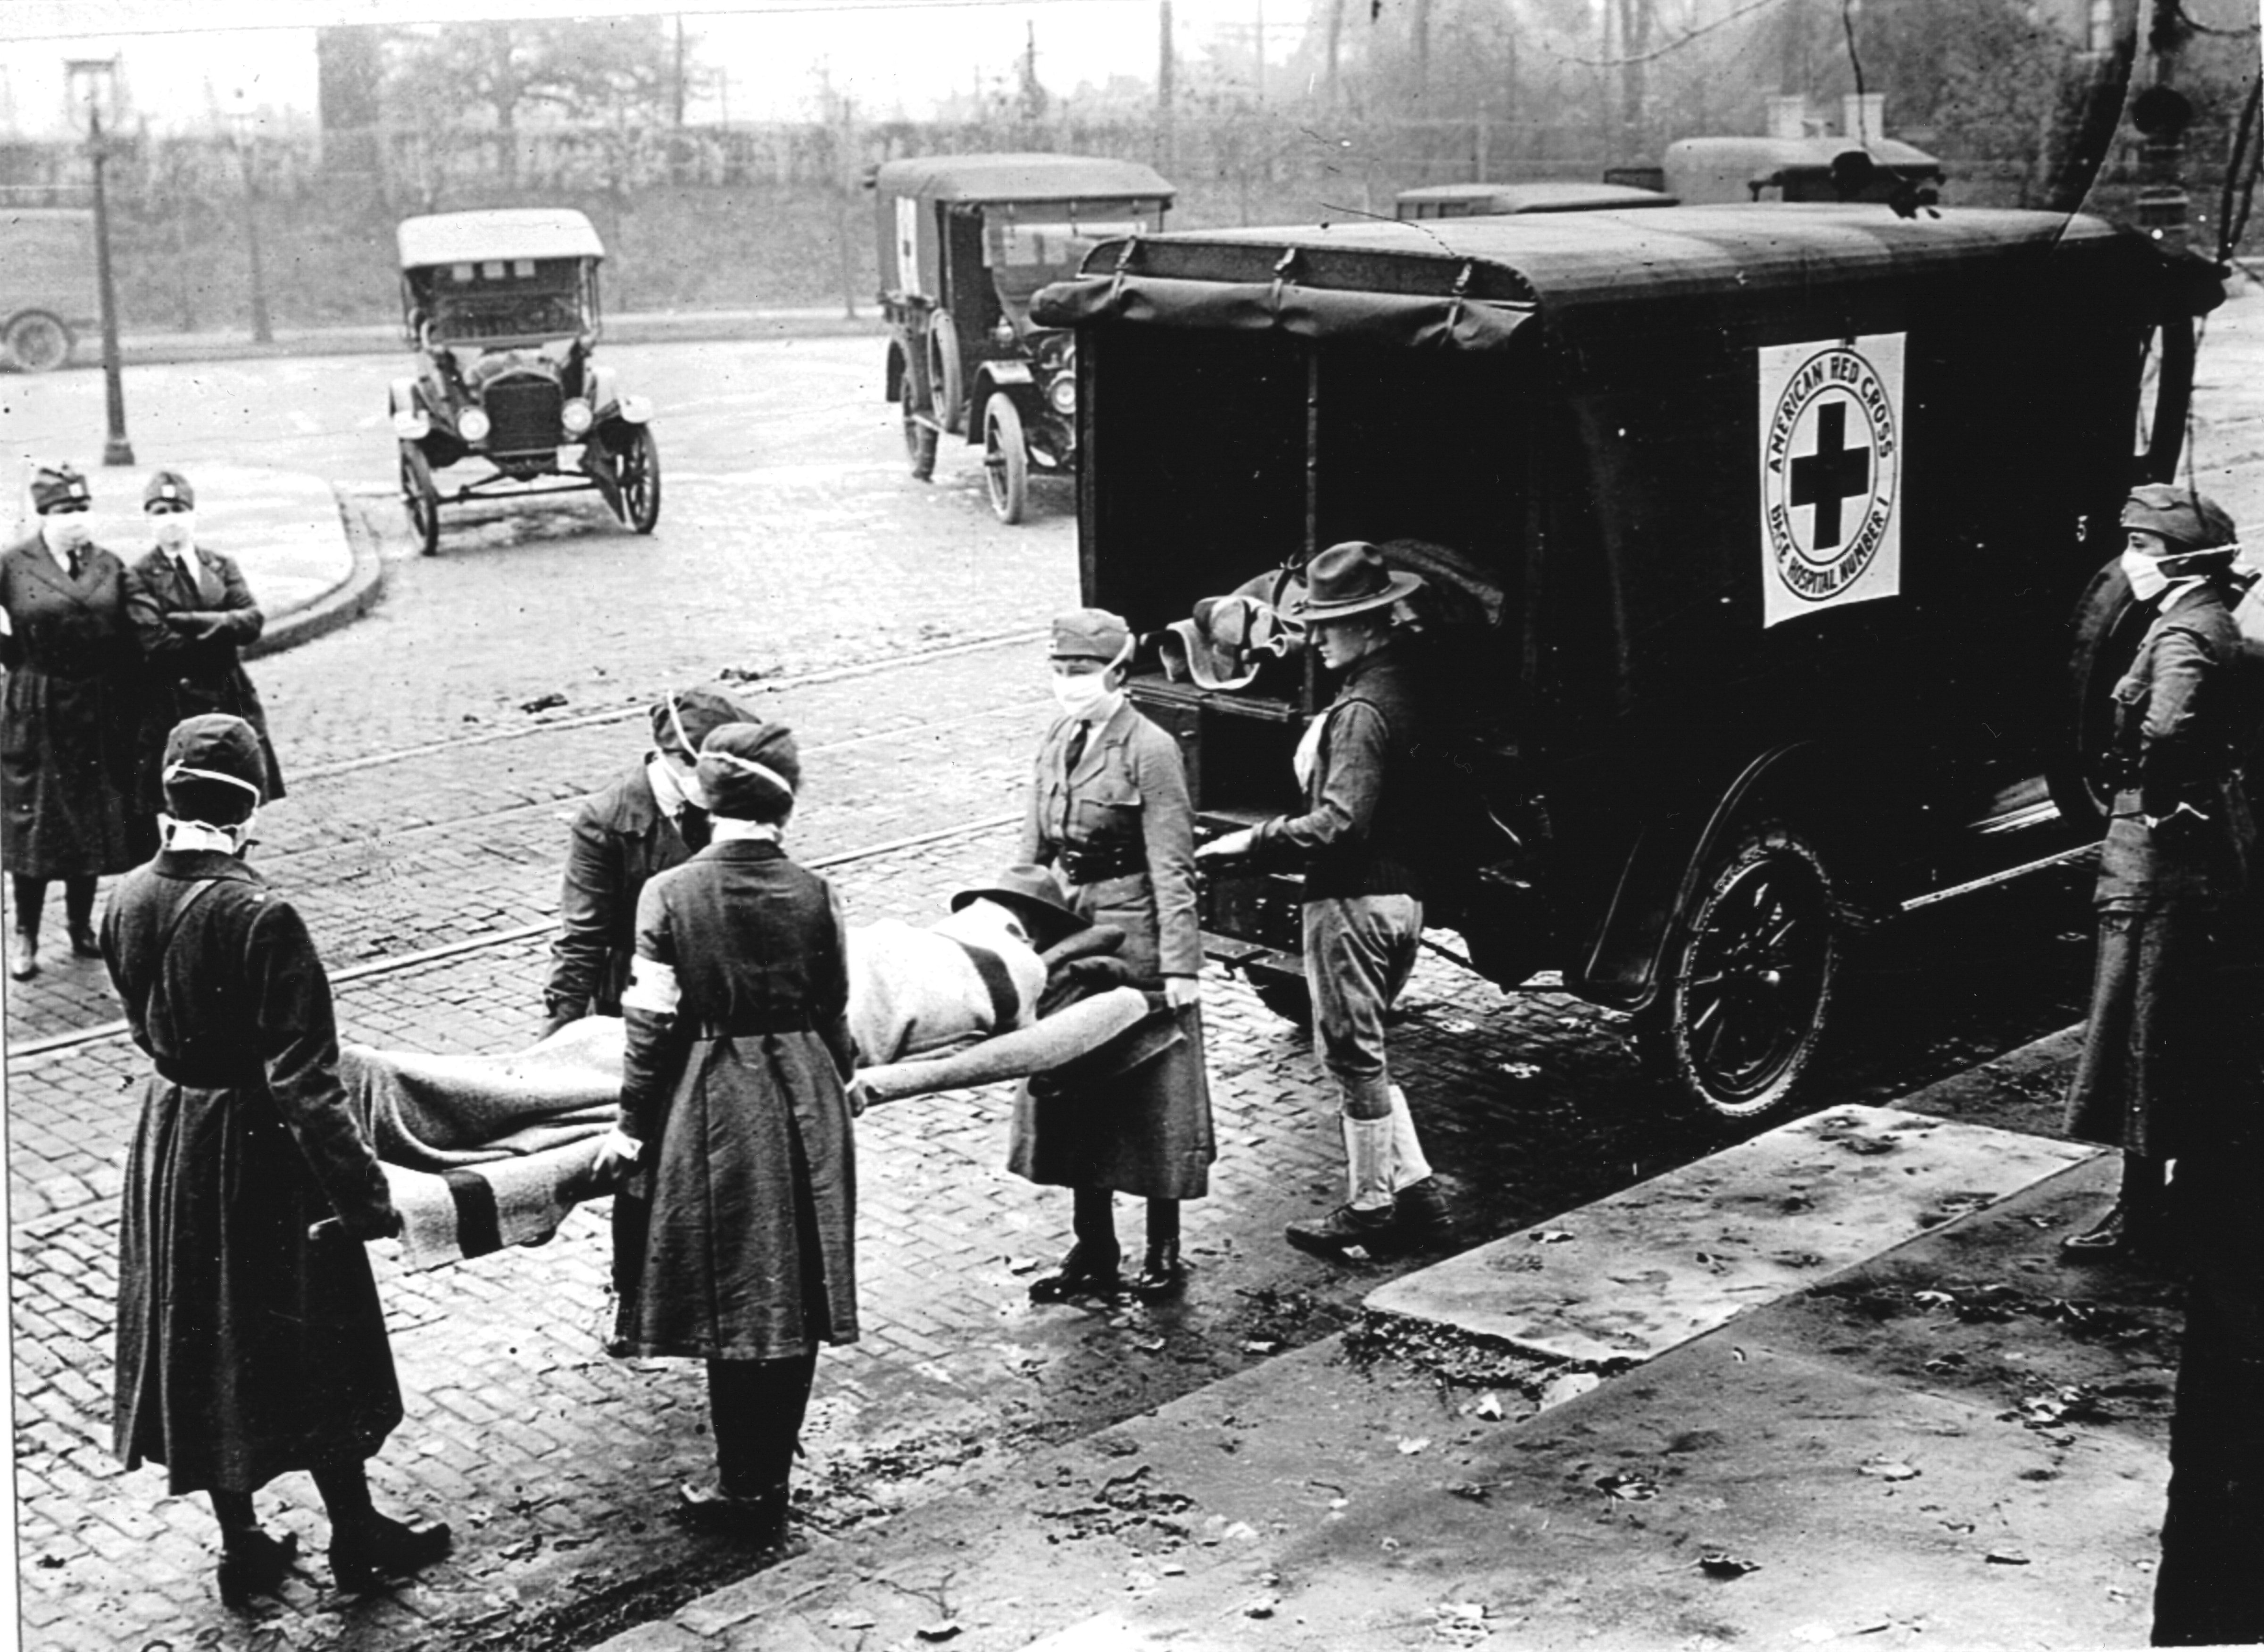 Members of the Red Cross Motor Corps, all wearing masks against the further spread of the influenza epidemic, carry a patient on a stretcher into their ambulance, Saint Louis, Missouri, October 1918. (PhotoQuest—Getty Images)